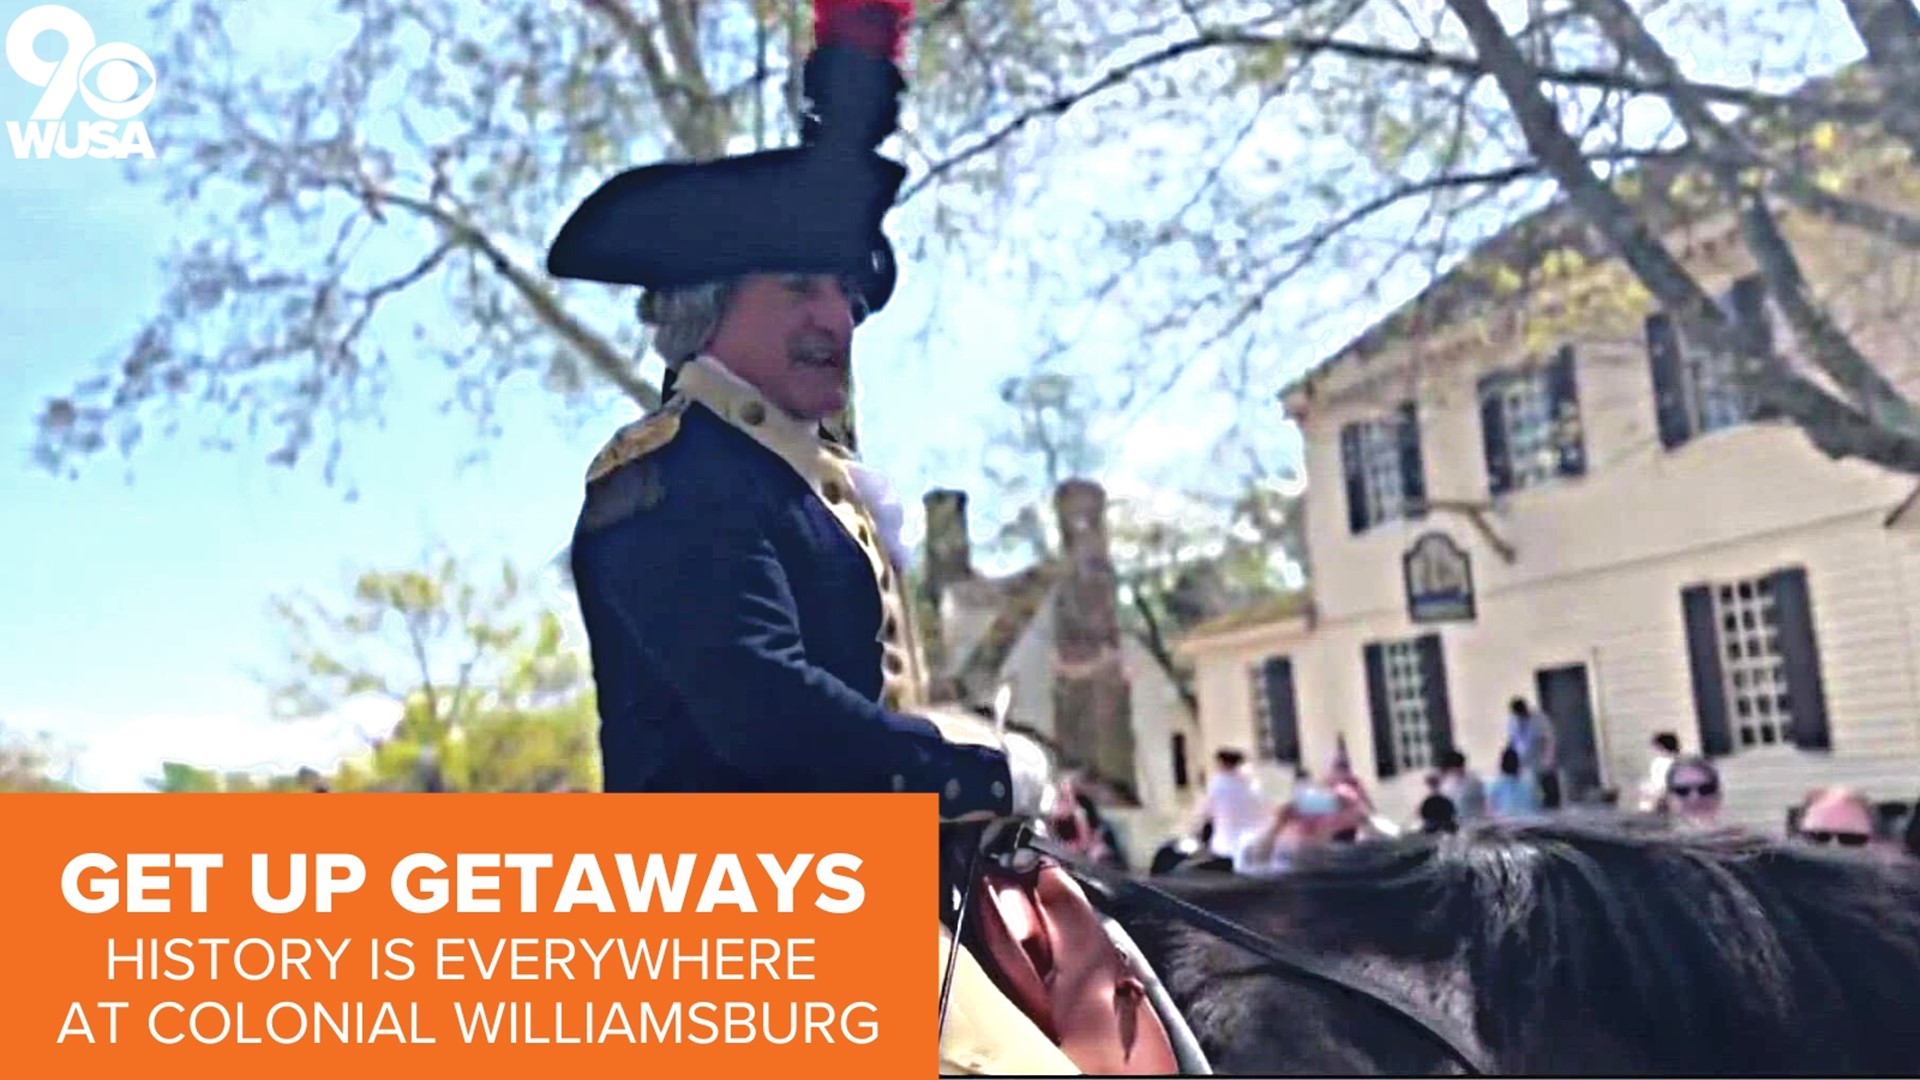 Colonial Williamsburg is the largest living history museum in the country.